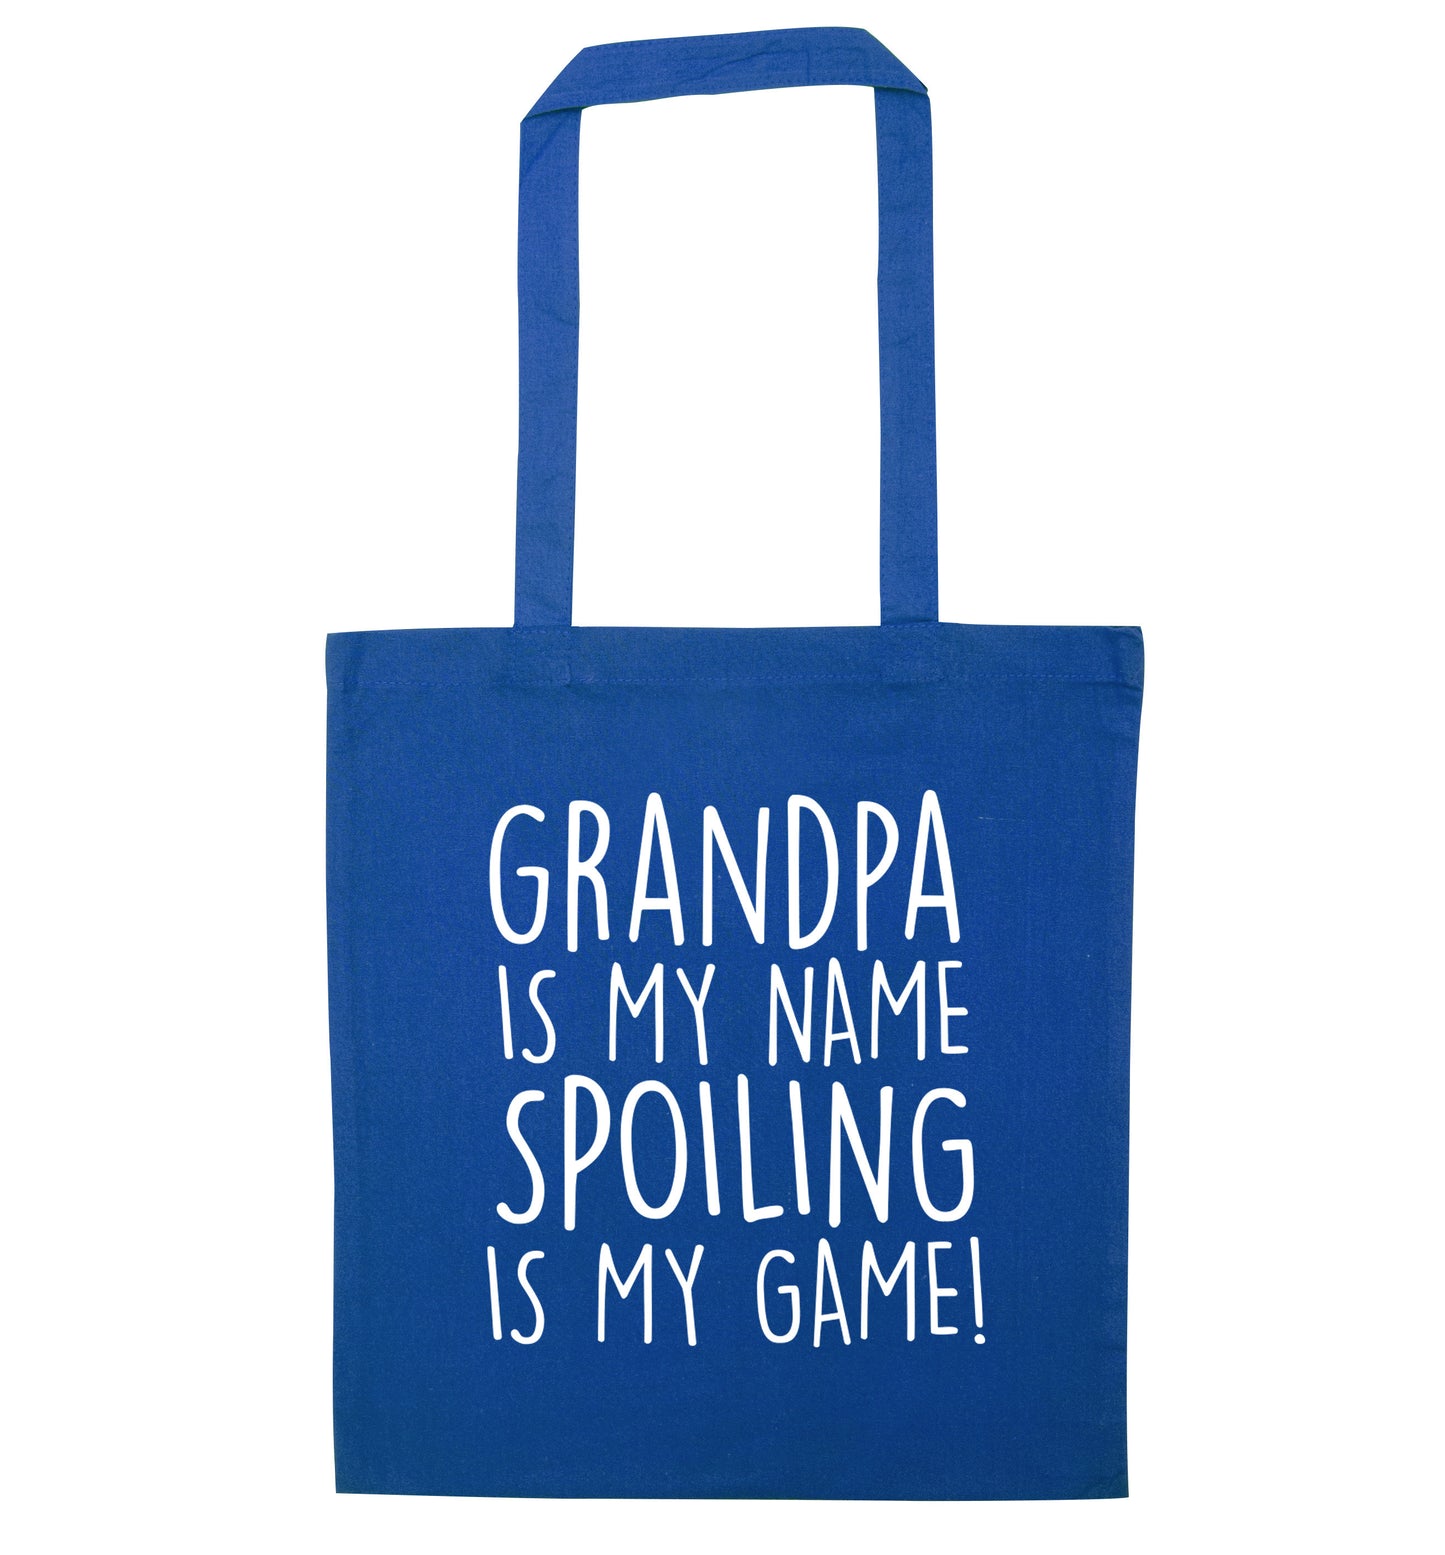 Grandpa is my name, spoiling is my game blue tote bag